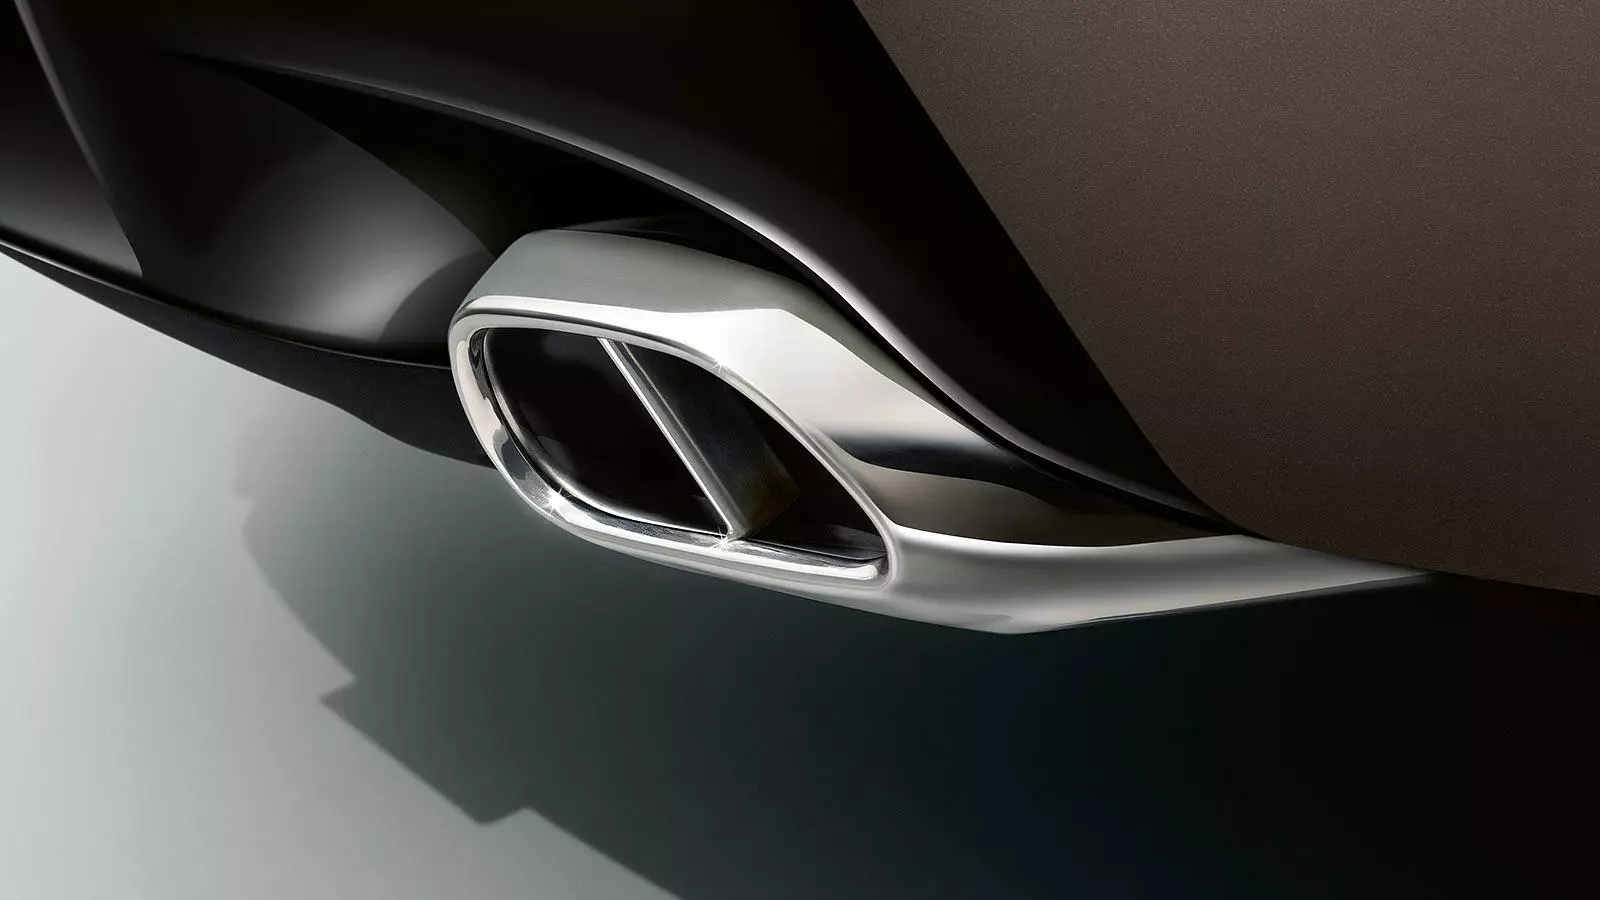 EXHAUSTS: THE PERFECT BALANCE OF POWER AND REFINEMENT